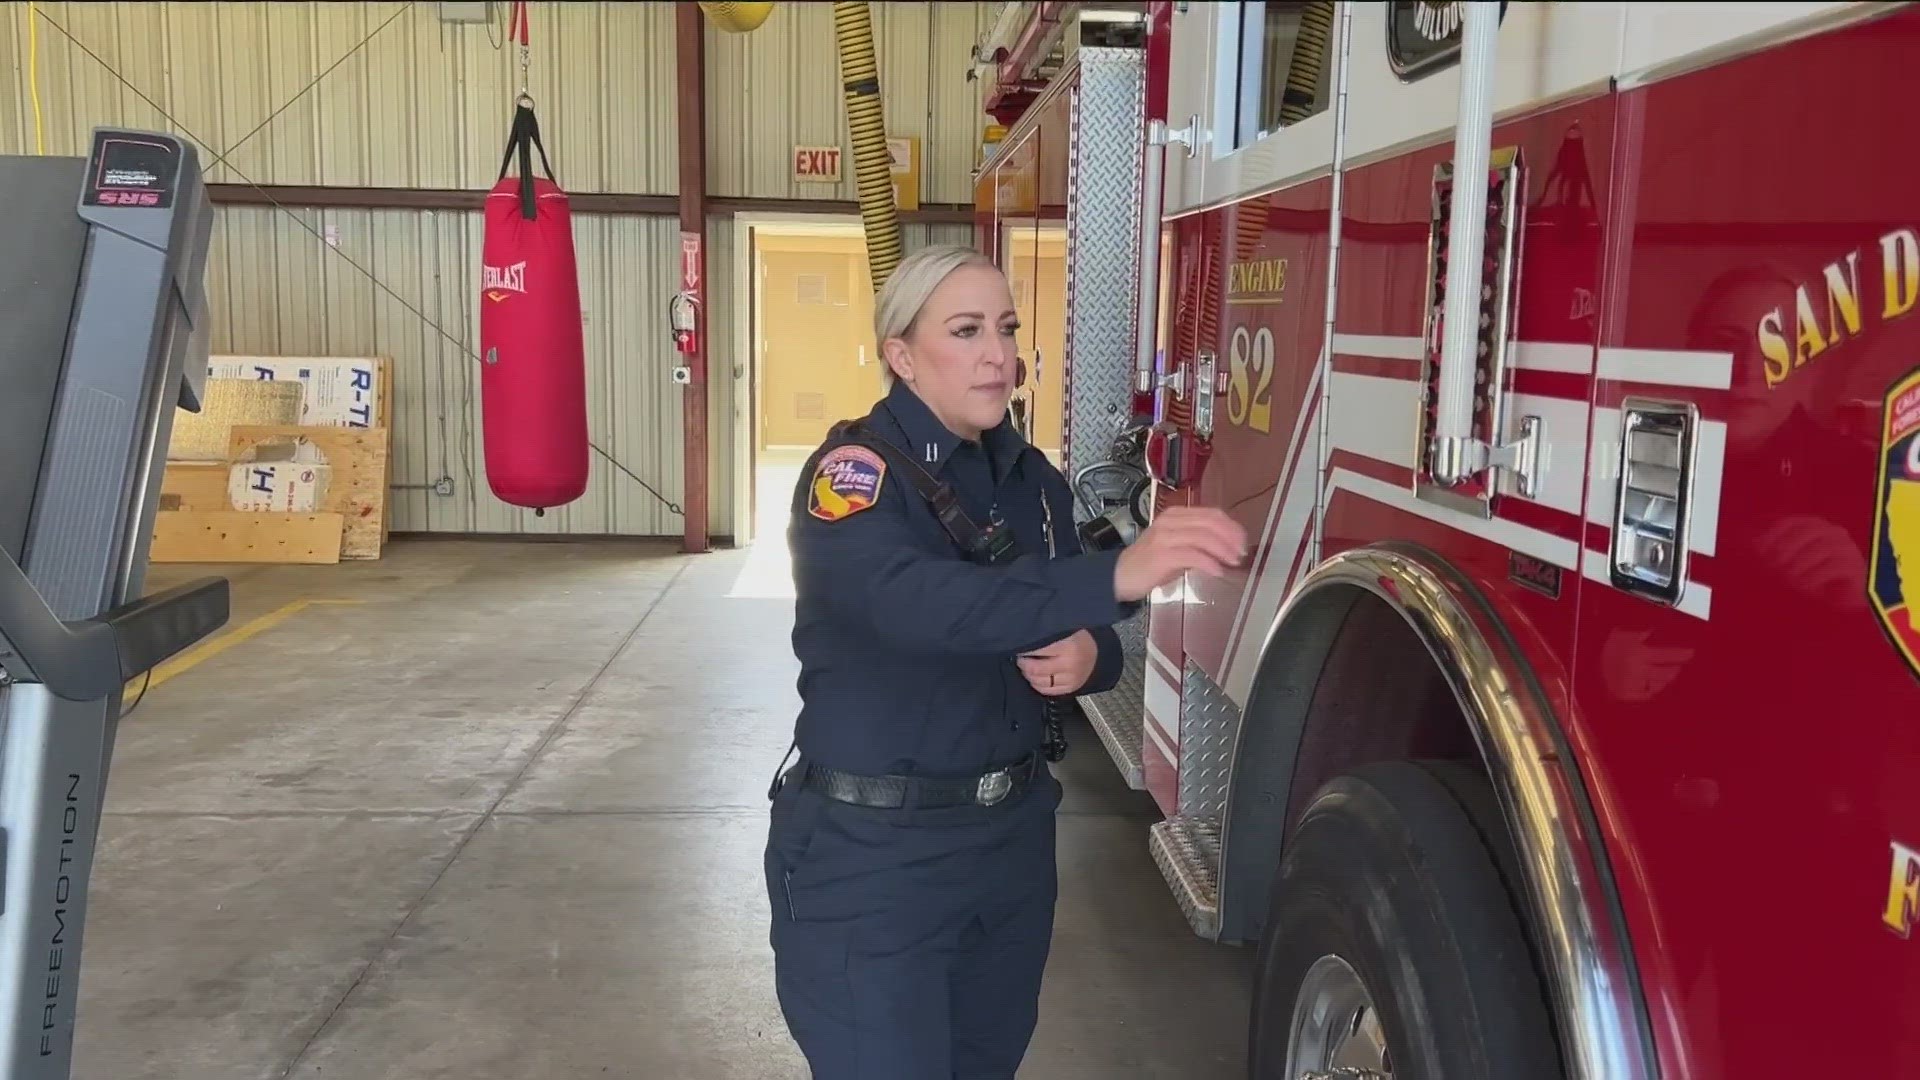 Shavawn Johnson is not only a talented singer, mother, and wife; she’s been a local firefighter for 15 years and a fire captain at Cal Fire for the last 3 years